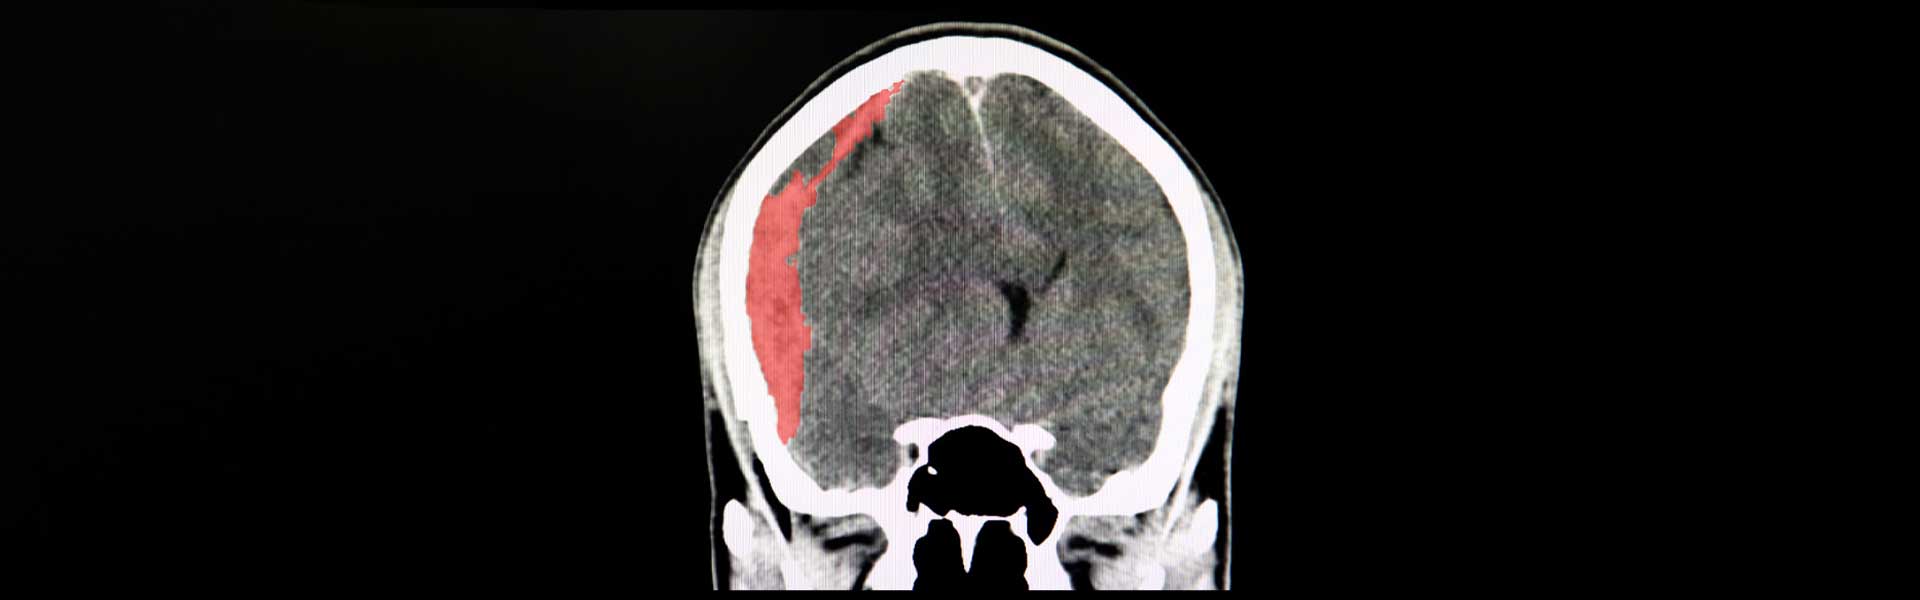 Subdural Hematoma 101: Types, Symptoms, Causes, and Treatment